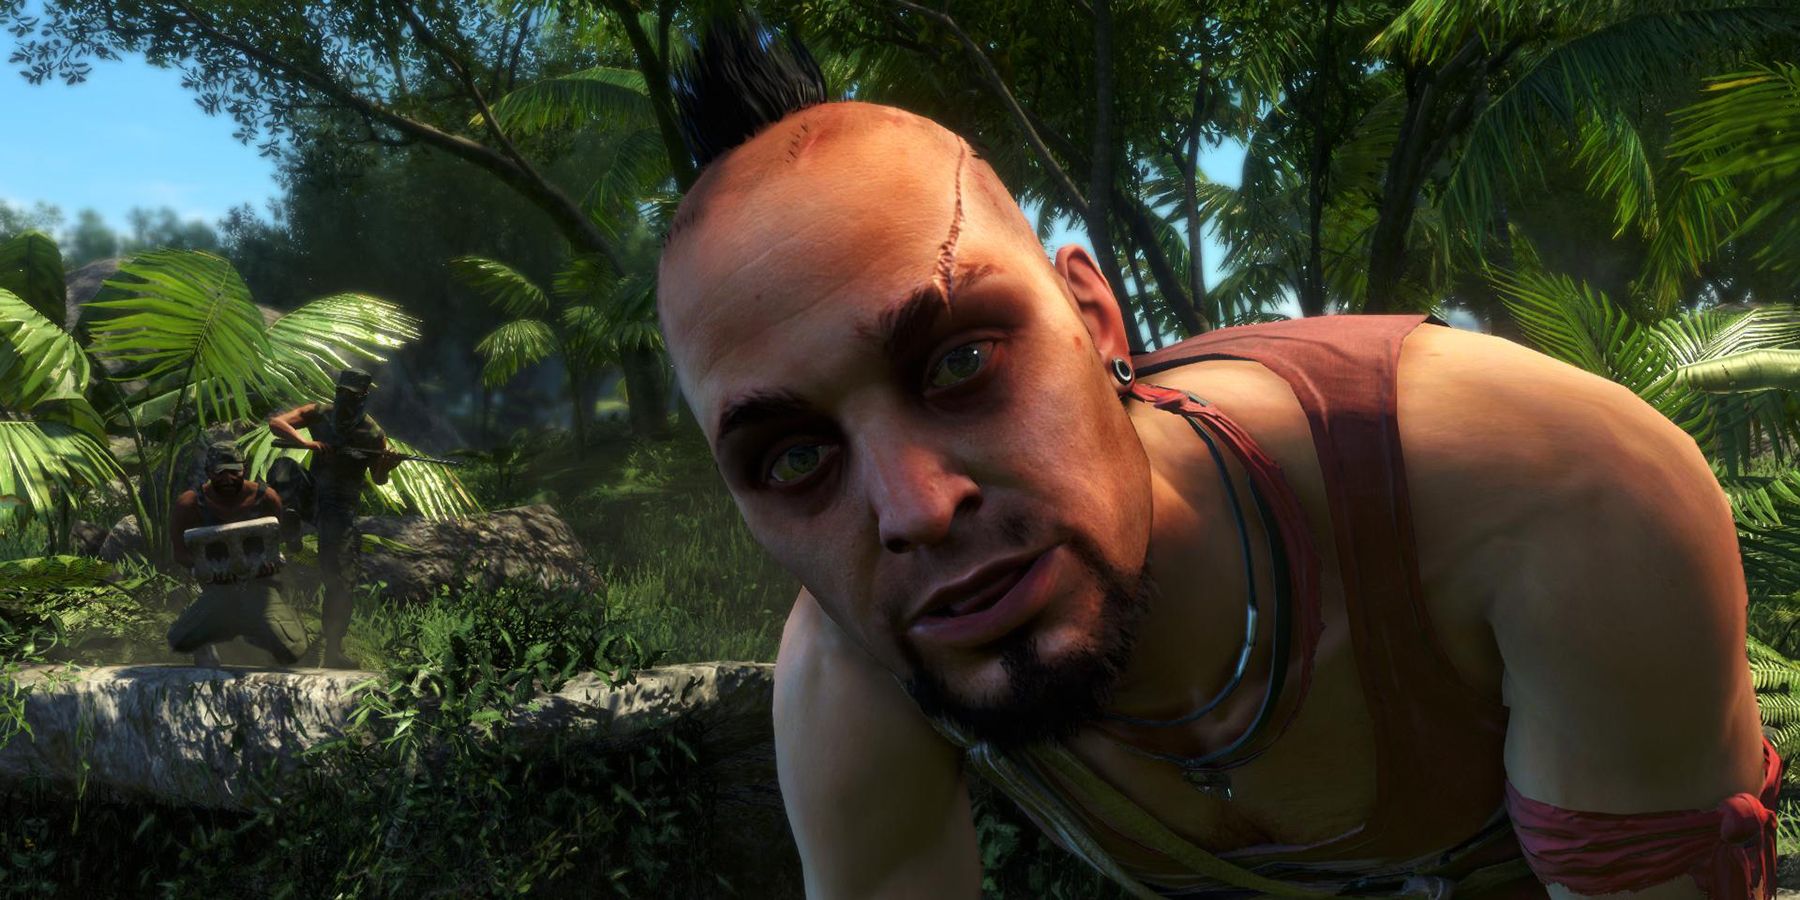 far-cry-6-vaas-dlc-trophy-list-embraces-the-definition-of-insanity